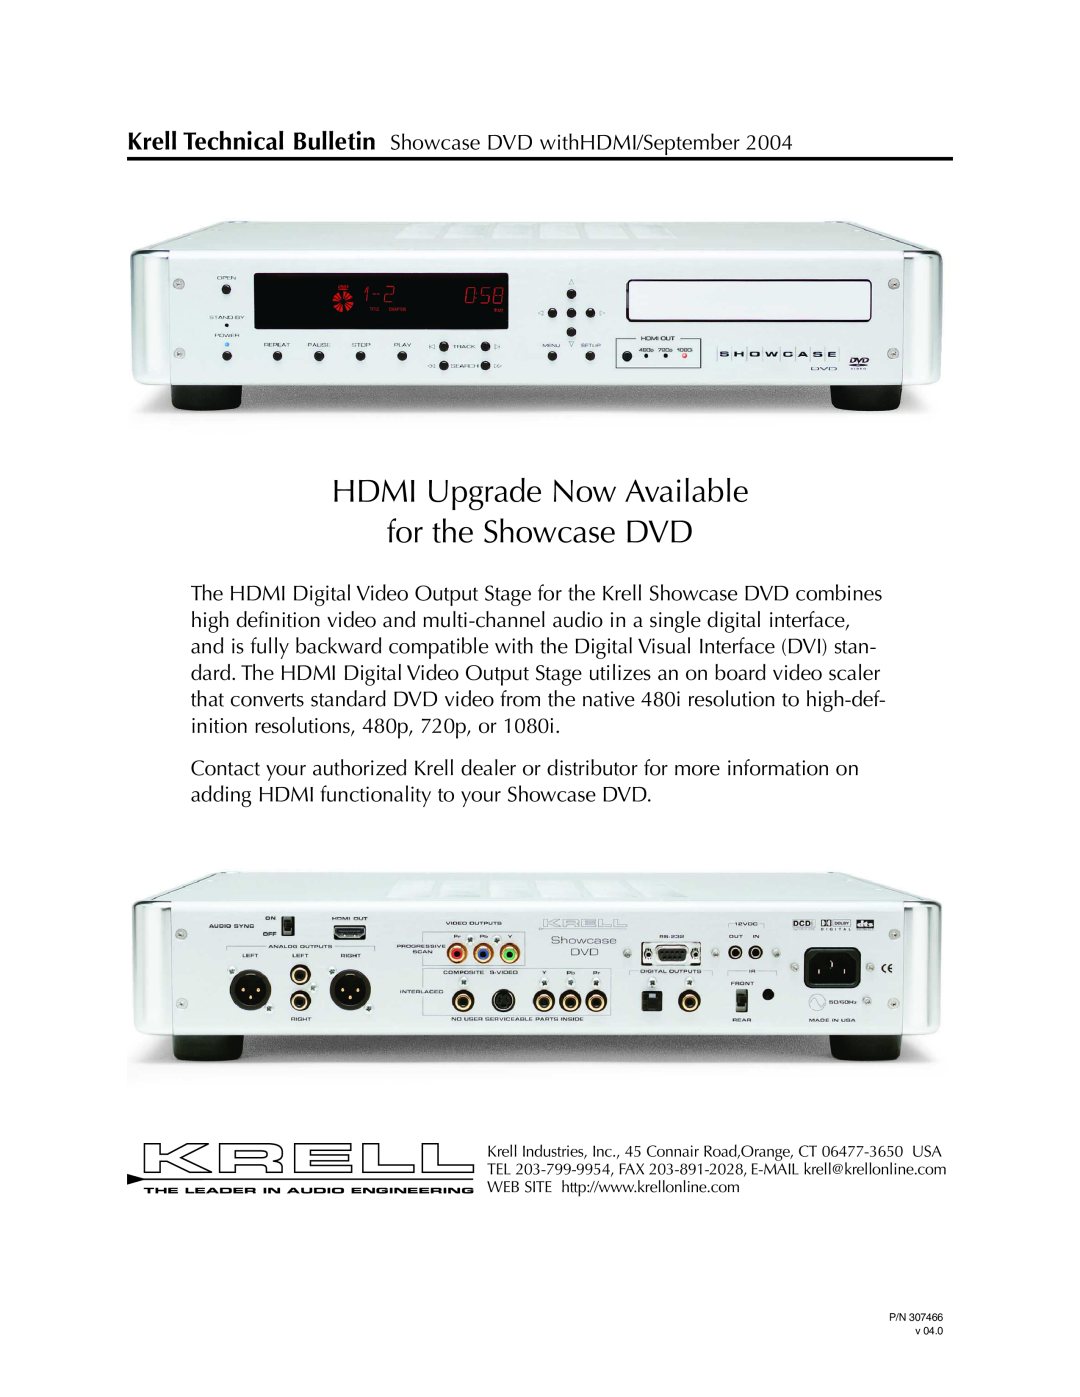 Krell Industries DVD Player manual HDMI Upgrade Now Available for the Showcase DVD 